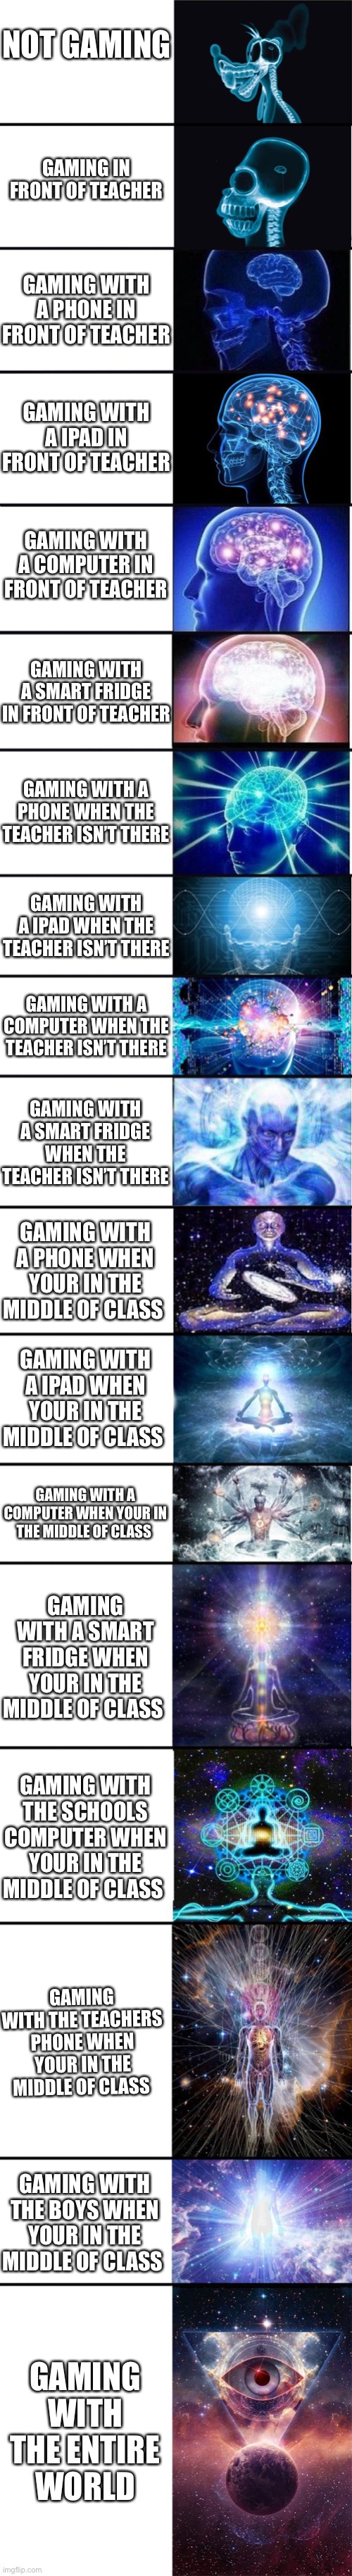 Nice long meme about gaming |  NOT GAMING; GAMING IN FRONT OF TEACHER; GAMING WITH A PHONE IN FRONT OF TEACHER; GAMING WITH A IPAD IN FRONT OF TEACHER; GAMING WITH A COMPUTER IN FRONT OF TEACHER; GAMING WITH A SMART FRIDGE IN FRONT OF TEACHER; GAMING WITH A PHONE WHEN THE TEACHER ISN’T THERE; GAMING WITH A IPAD WHEN THE TEACHER ISN’T THERE; GAMING WITH A COMPUTER WHEN THE TEACHER ISN’T THERE; GAMING WITH A SMART FRIDGE WHEN THE TEACHER ISN’T THERE; GAMING WITH A PHONE WHEN YOUR IN THE MIDDLE OF CLASS; GAMING WITH A IPAD WHEN YOUR IN THE MIDDLE OF CLASS; GAMING WITH A COMPUTER WHEN YOUR IN THE MIDDLE OF CLASS; GAMING WITH A SMART FRIDGE WHEN YOUR IN THE MIDDLE OF CLASS; GAMING WITH THE SCHOOLS COMPUTER WHEN YOUR IN THE MIDDLE OF CLASS; GAMING WITH THE TEACHERS PHONE WHEN YOUR IN THE MIDDLE OF CLASS; GAMING WITH THE BOYS WHEN YOUR IN THE MIDDLE OF CLASS; GAMING WITH THE ENTIRE WORLD WHEN YOUR IN THE MIDDLE OF CLASS | image tagged in expanding brain 9001 | made w/ Imgflip meme maker